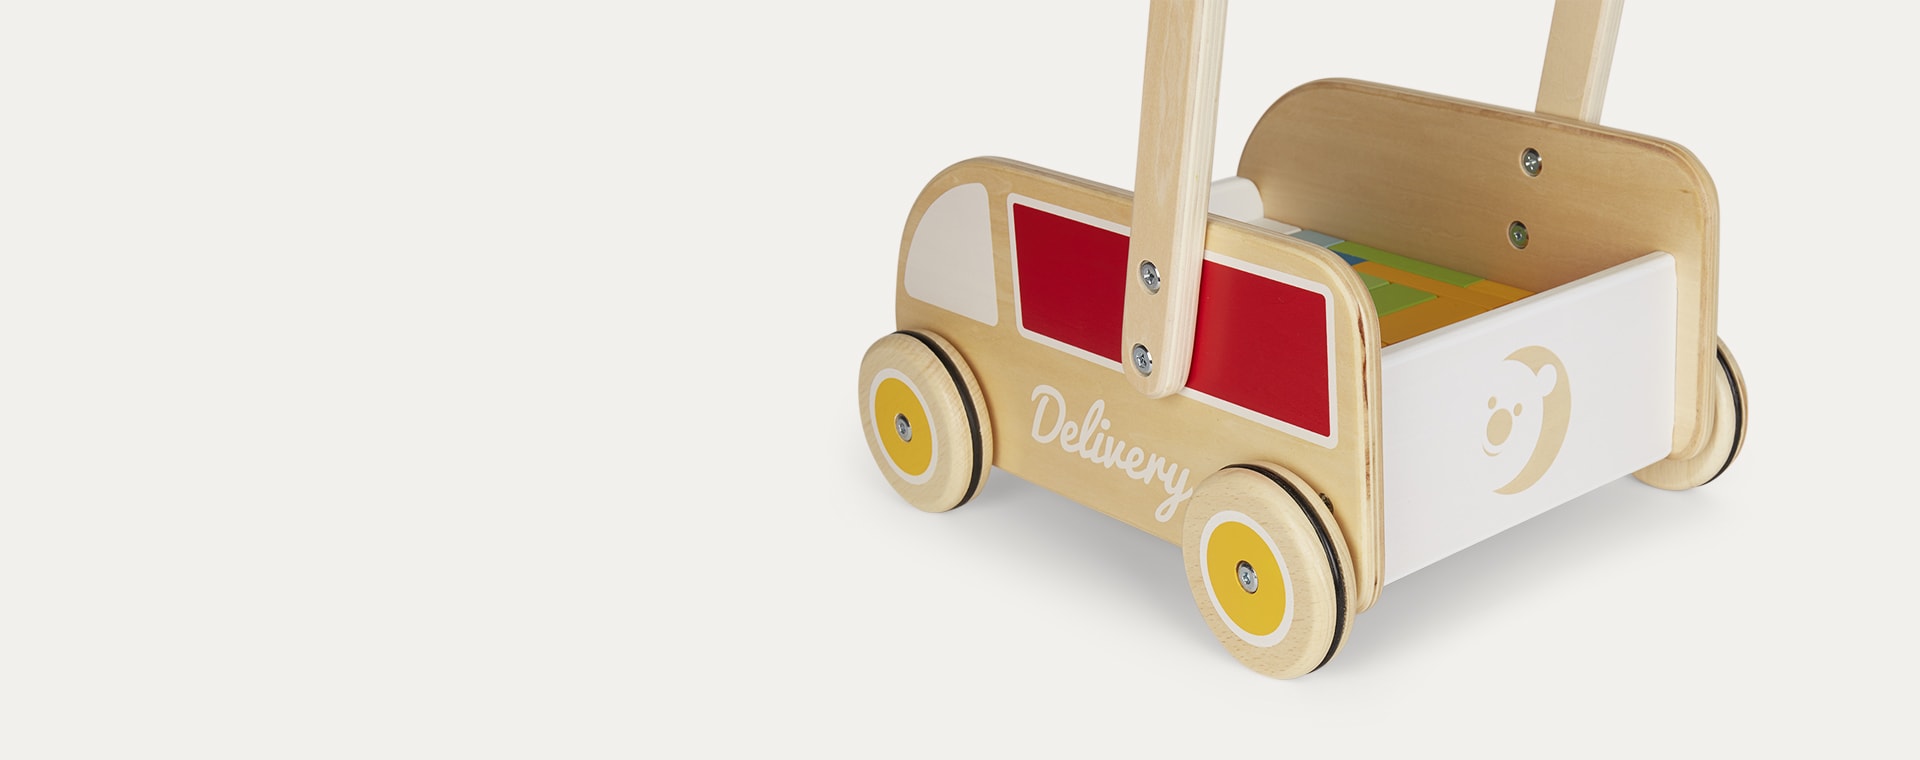 Multi Classic World Delivery Truck Baby Walker